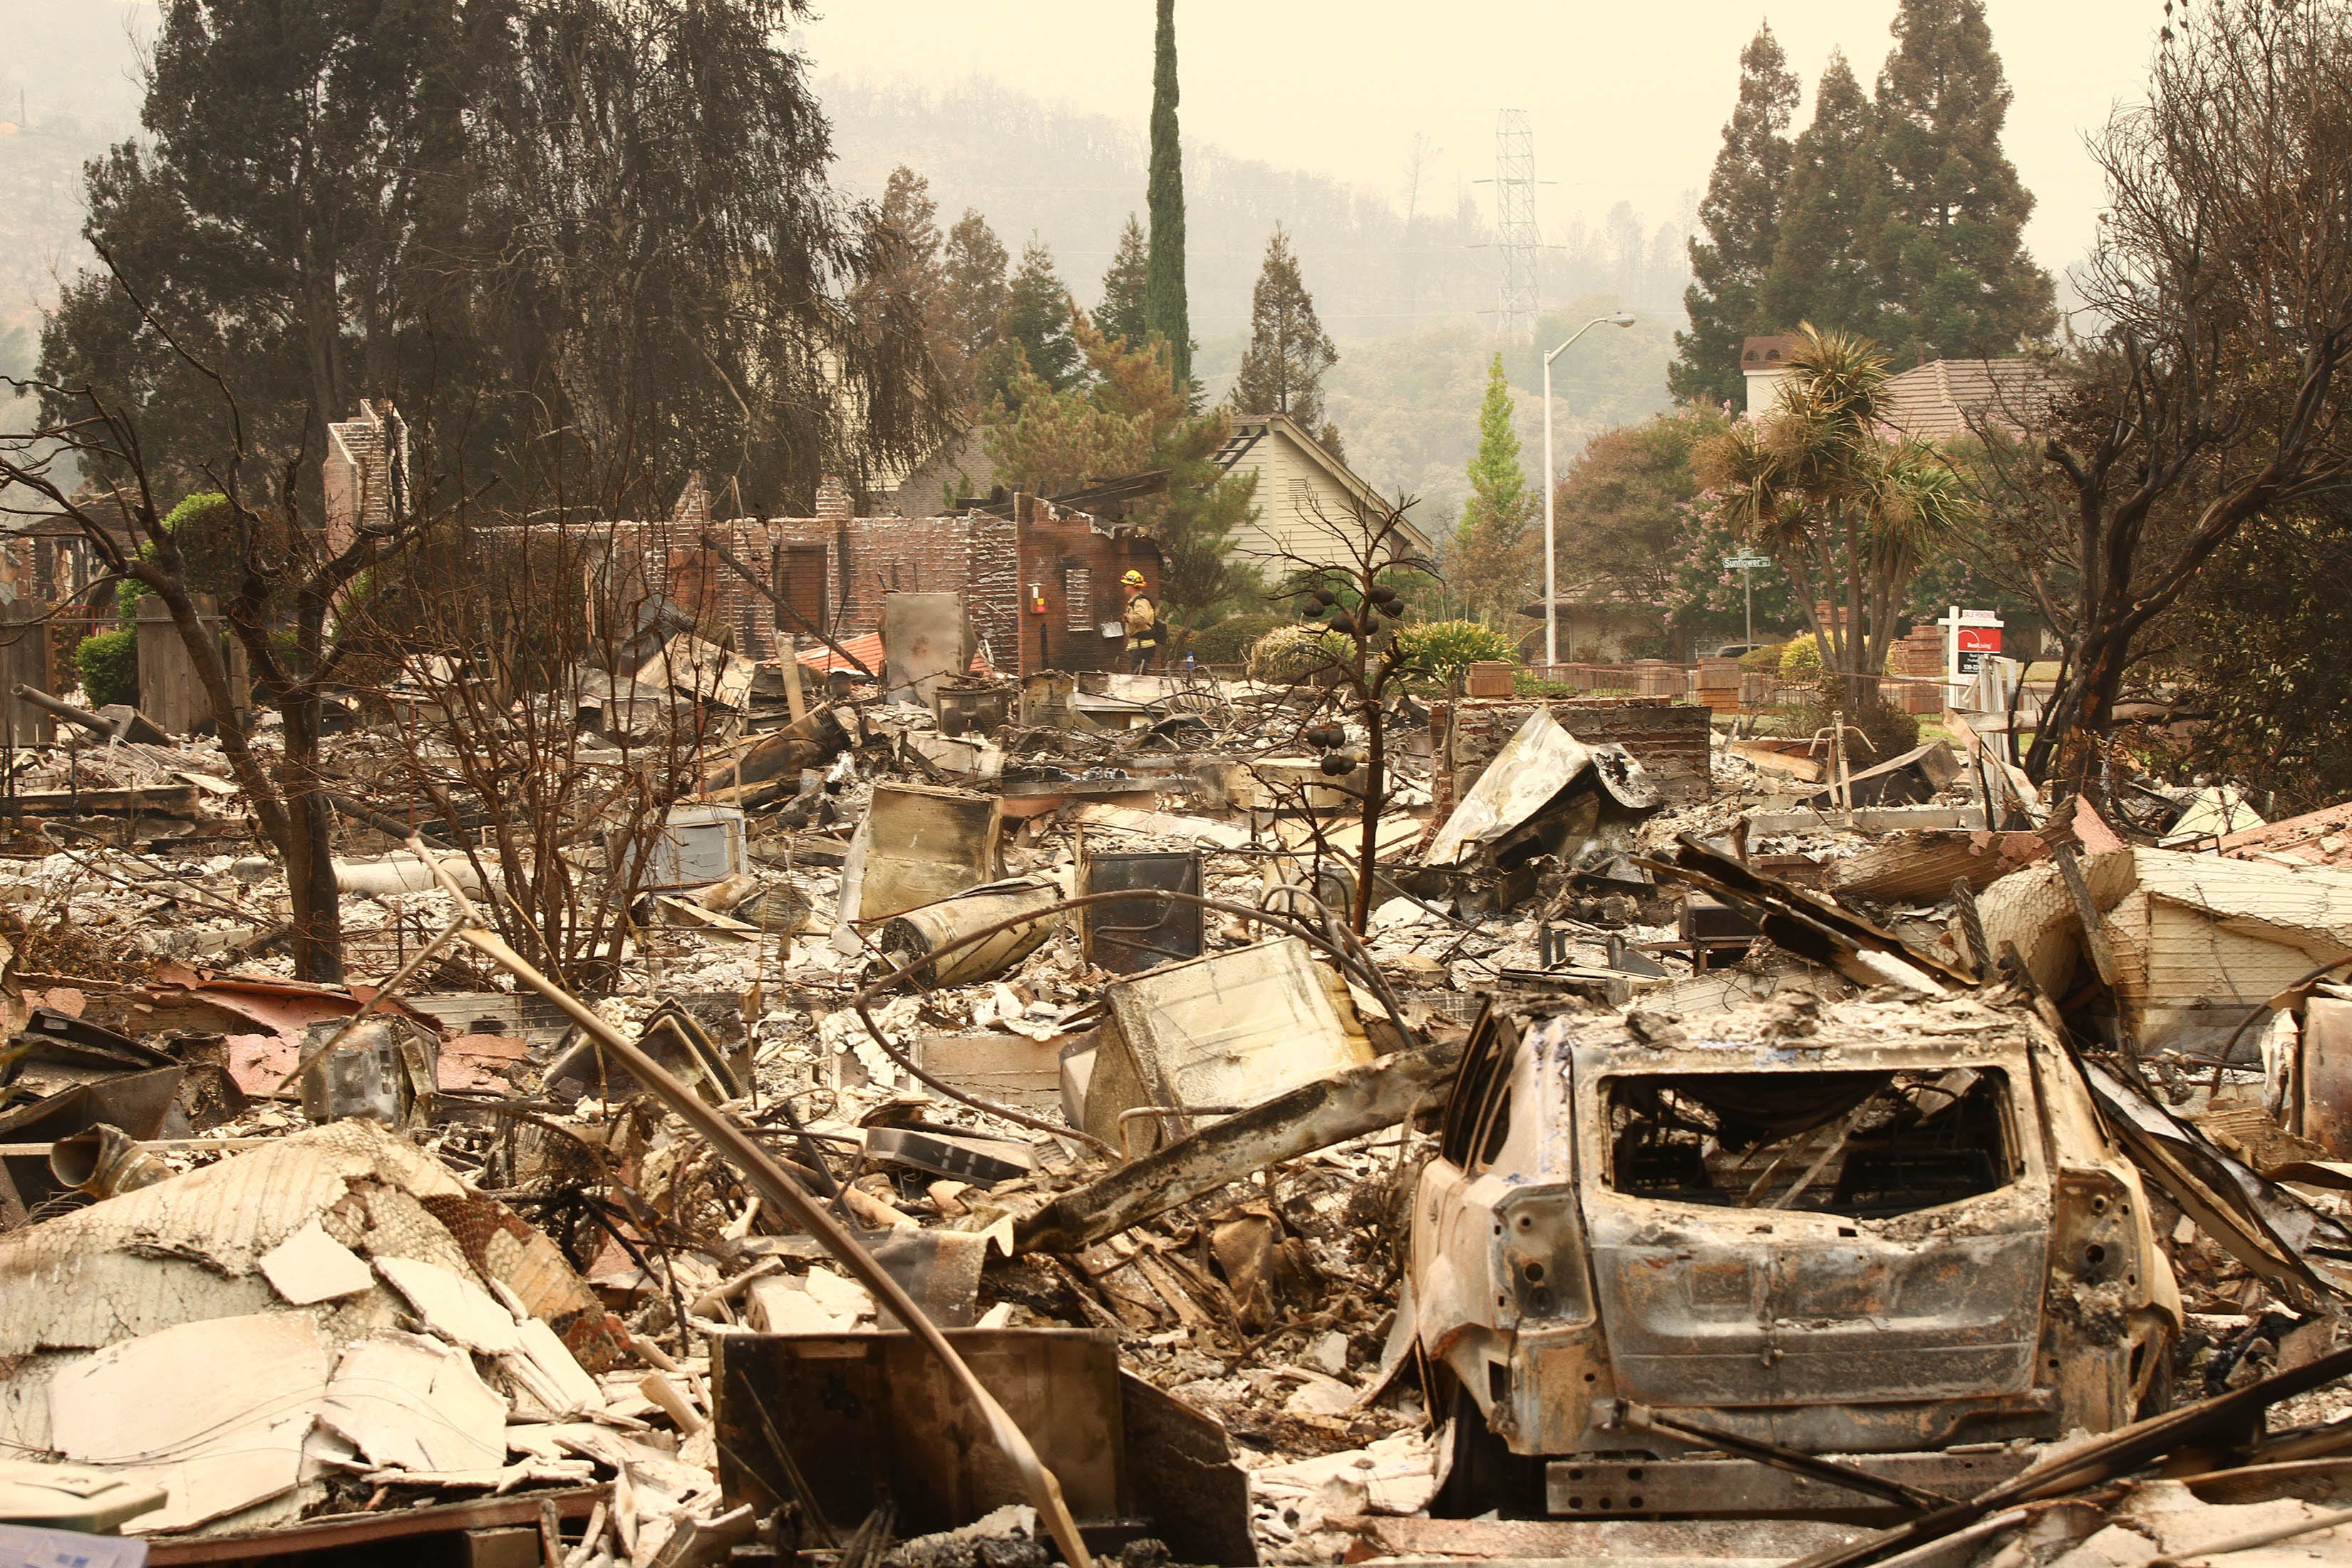 A firefighter walks through a residential area destroyed by the Carr wildfire in Salt Creek Heights, Calif. on July 29, 2018.  Firefighters battling intense heat and strong winds struggled Monday to gain control of a deadly Northern California wildfir